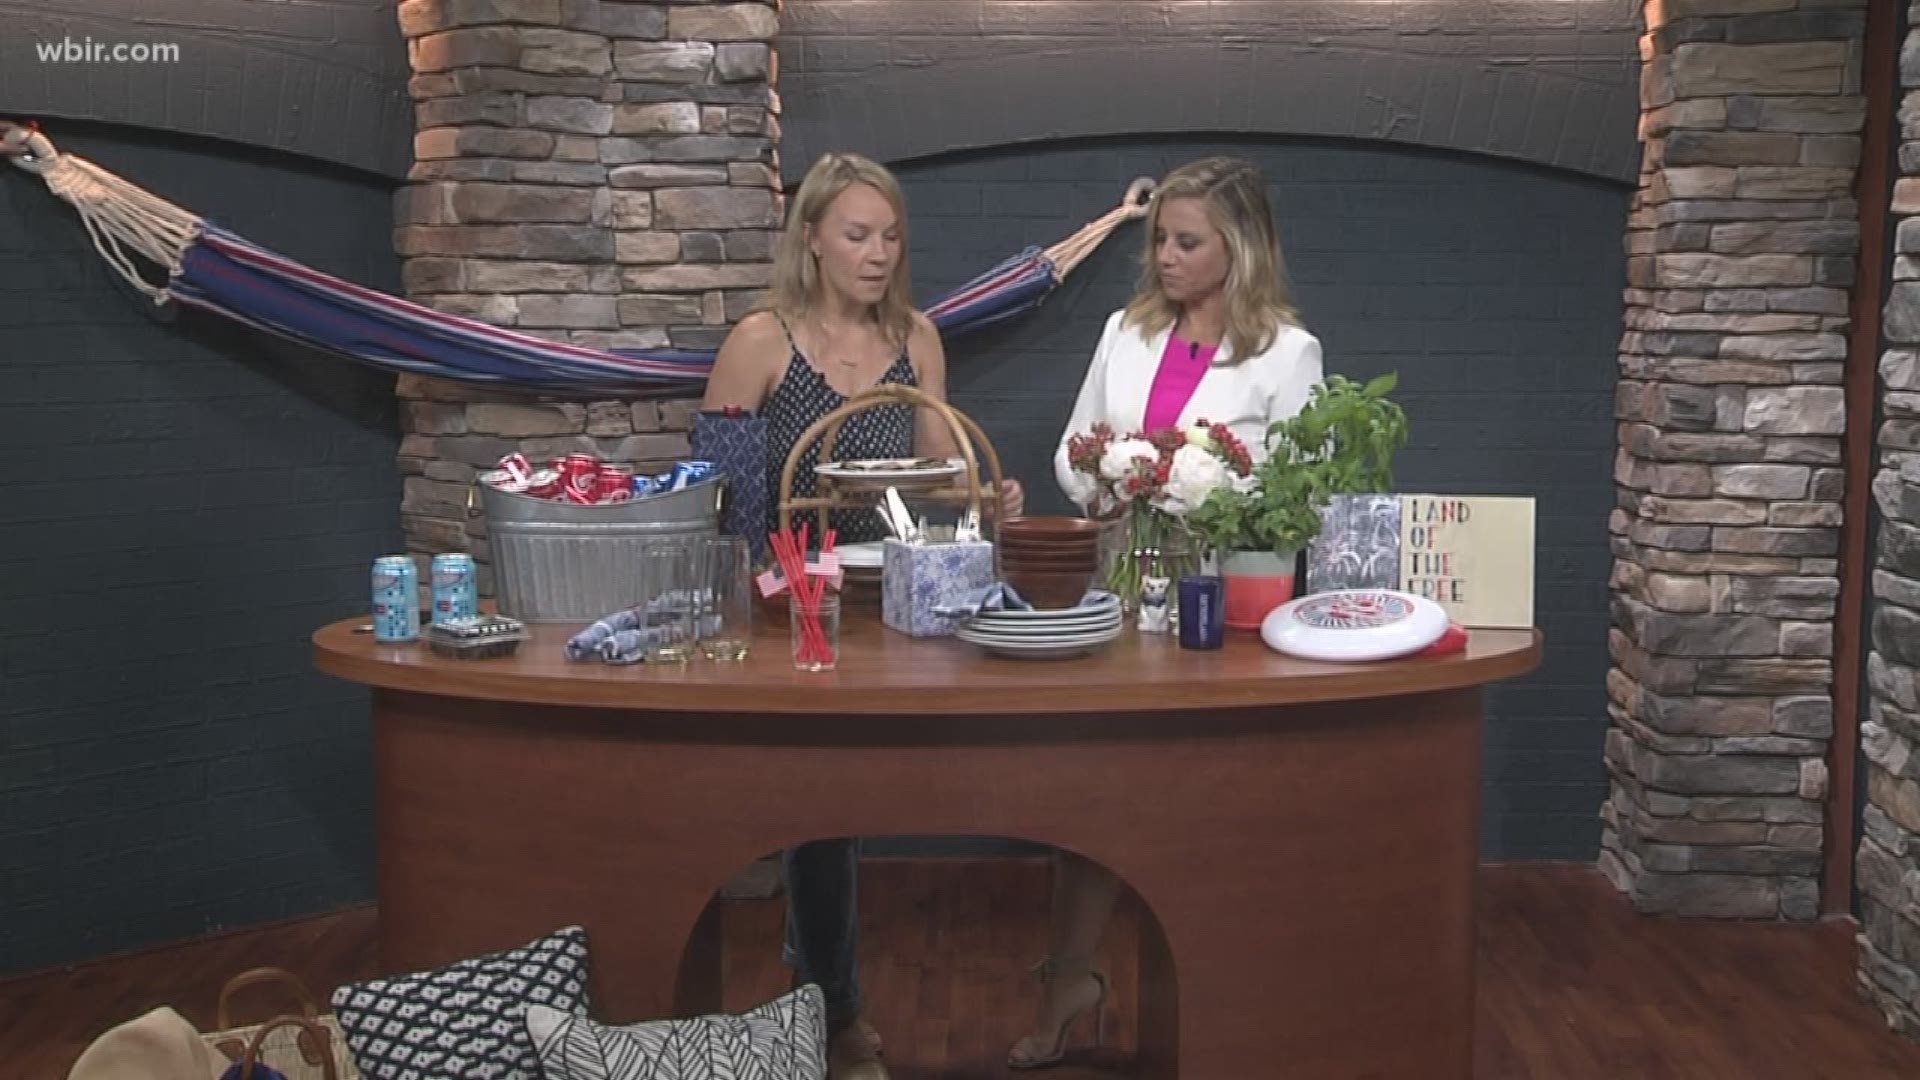 Brooke Phillips has tips on how to host a festive Forth of July party with common household items.